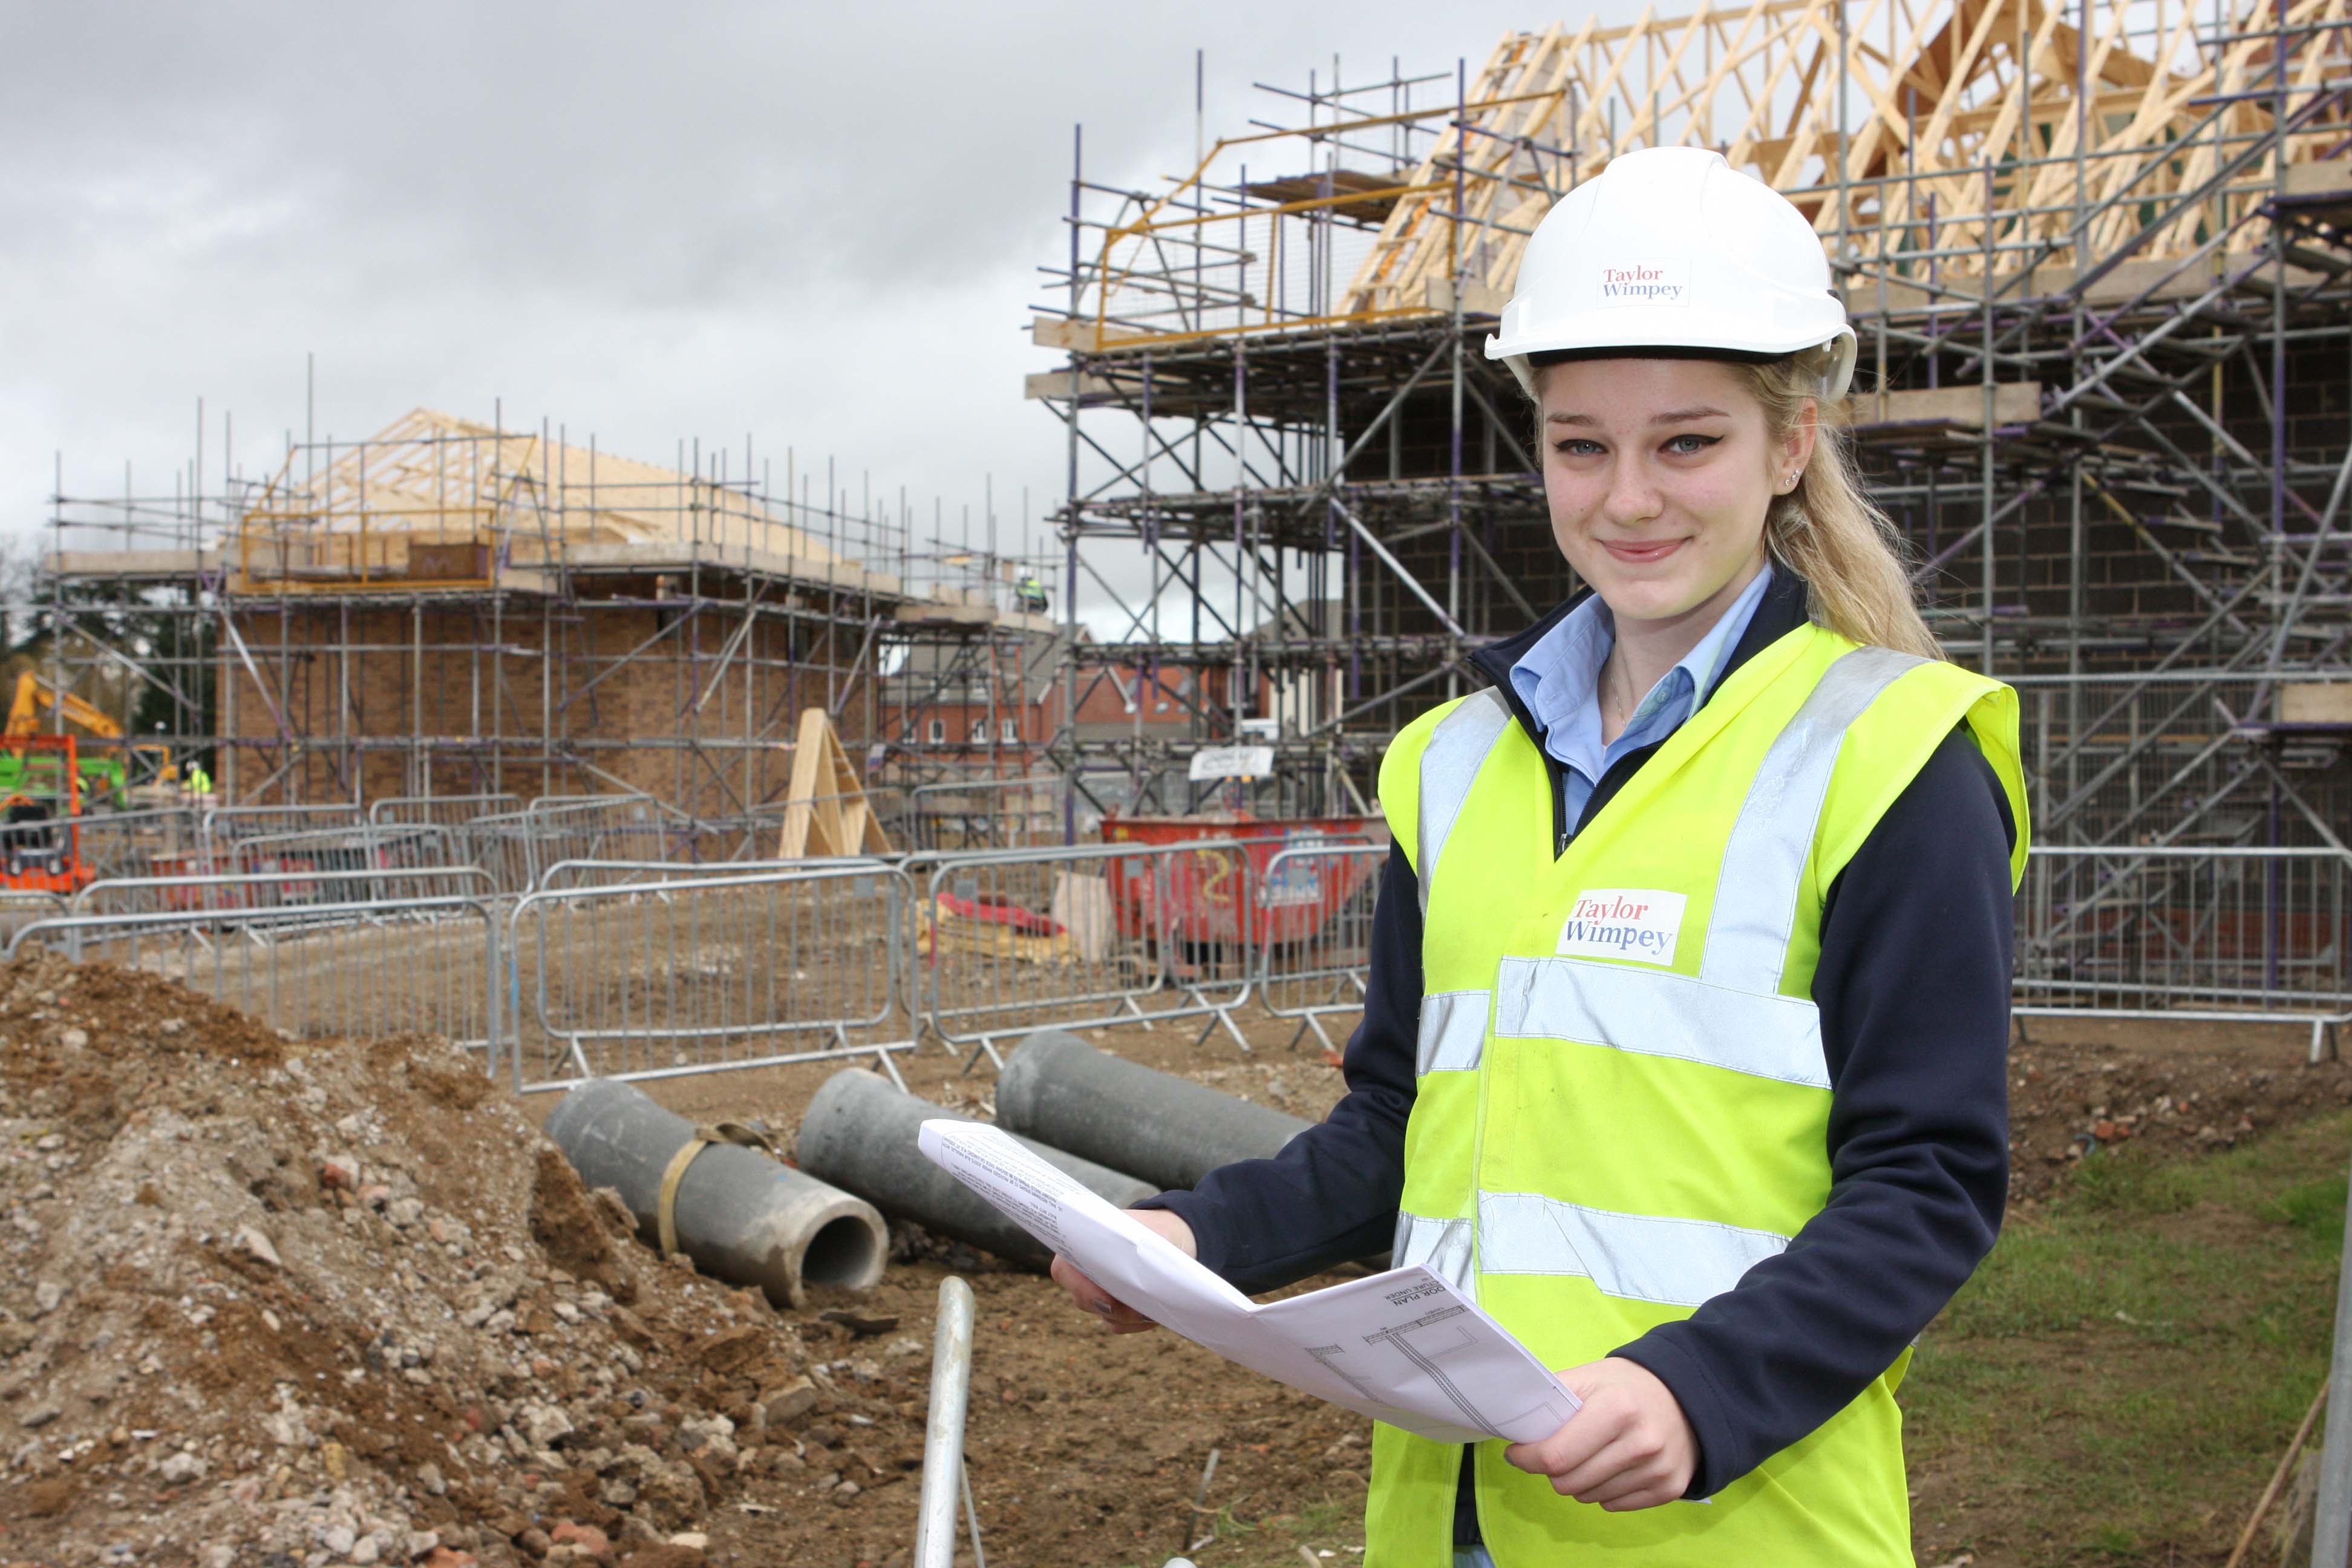 Taylor Wimpey supports National Apprenticeship Week